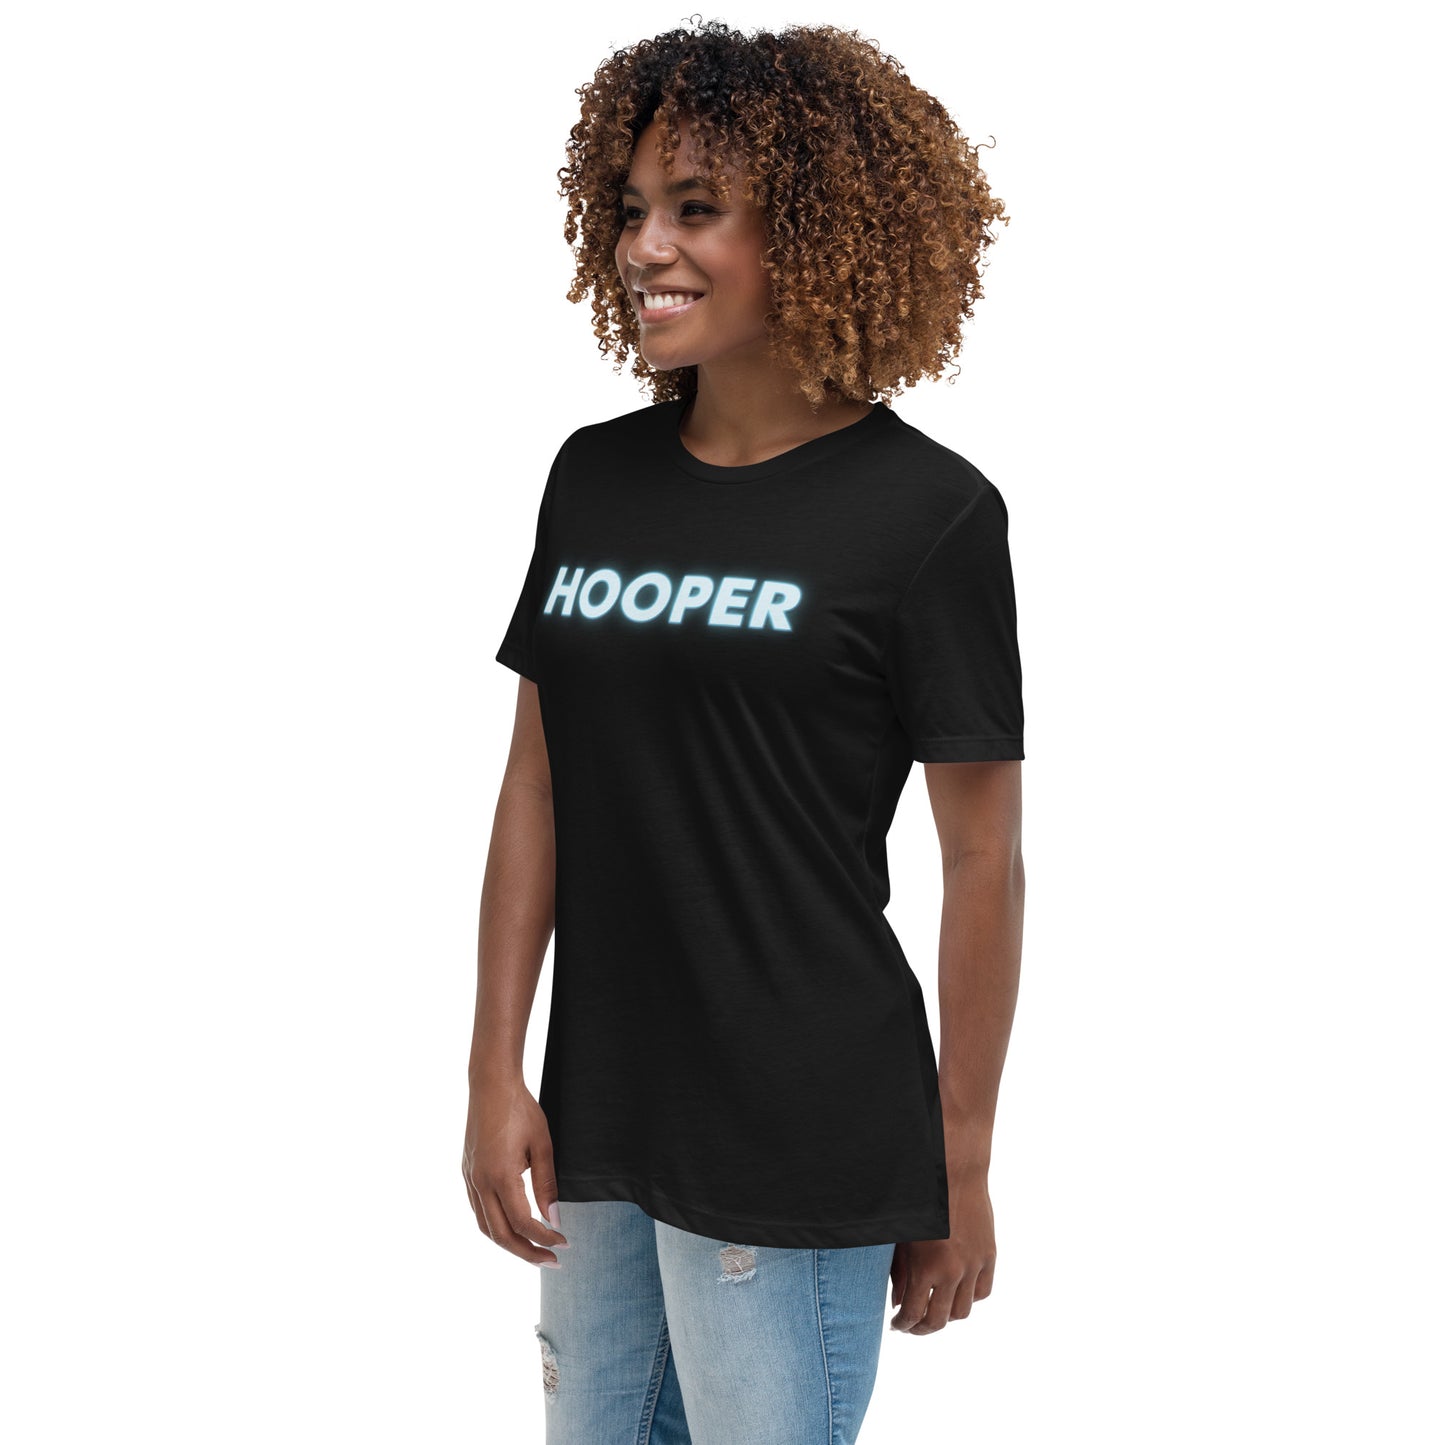 Blue Hooper Women's Relaxed T-Shirt - Comfortable and Stylish Casual Wear